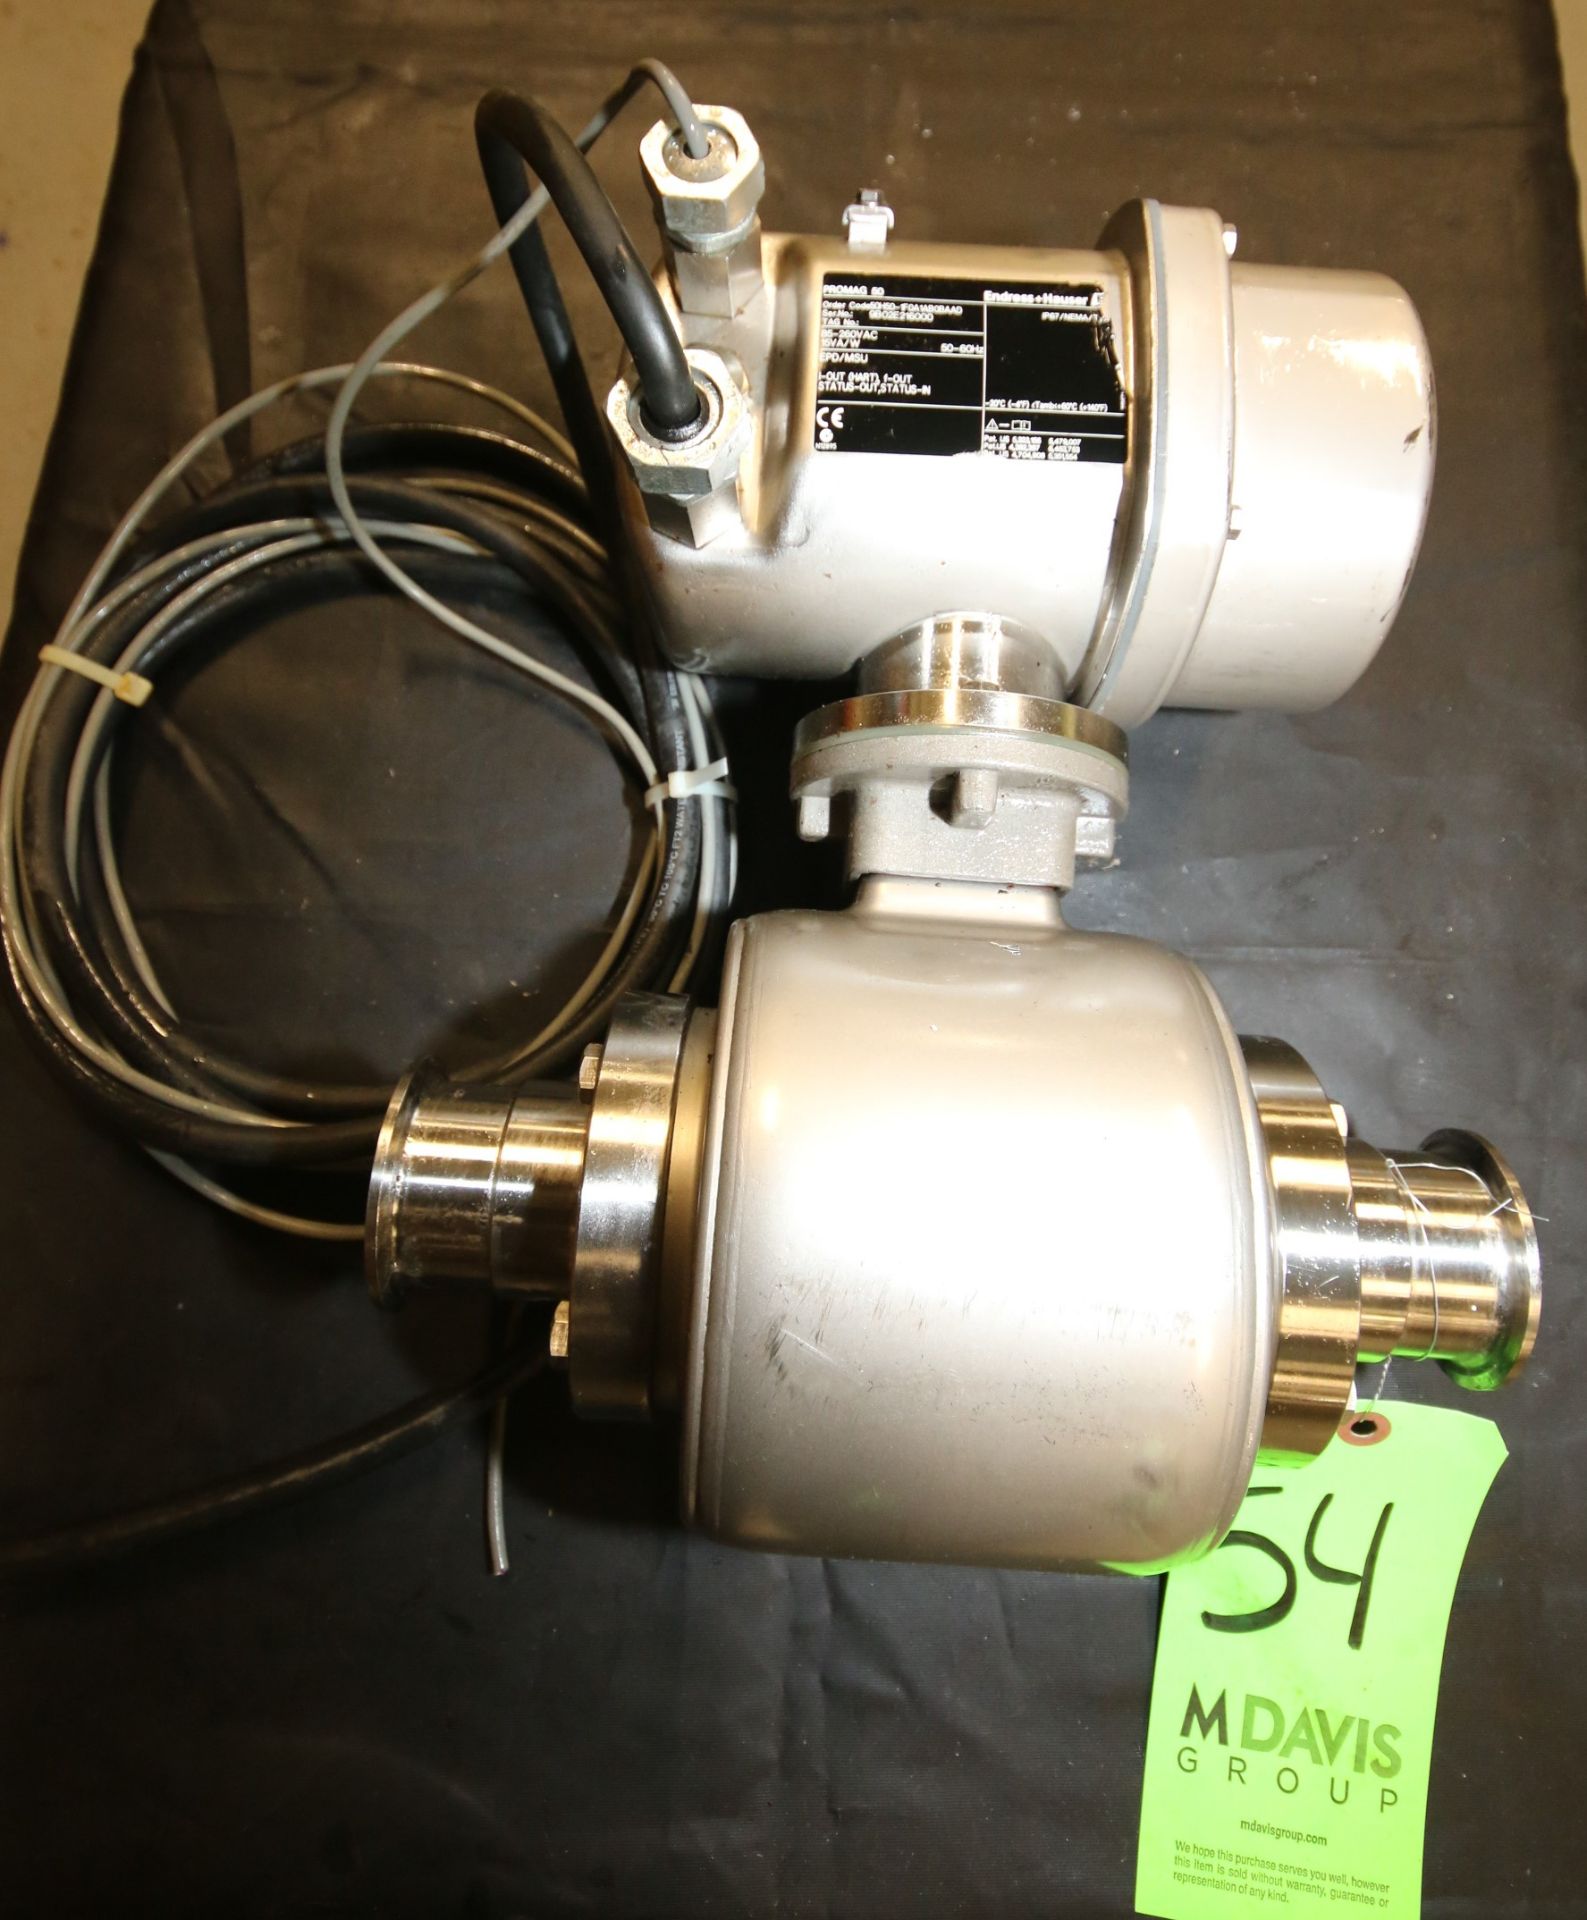 Endress Hauser 2" Clamp Typa In-Line S/S Flow Meter, Model Promag 50, S/N 9B02E216000 with Digital